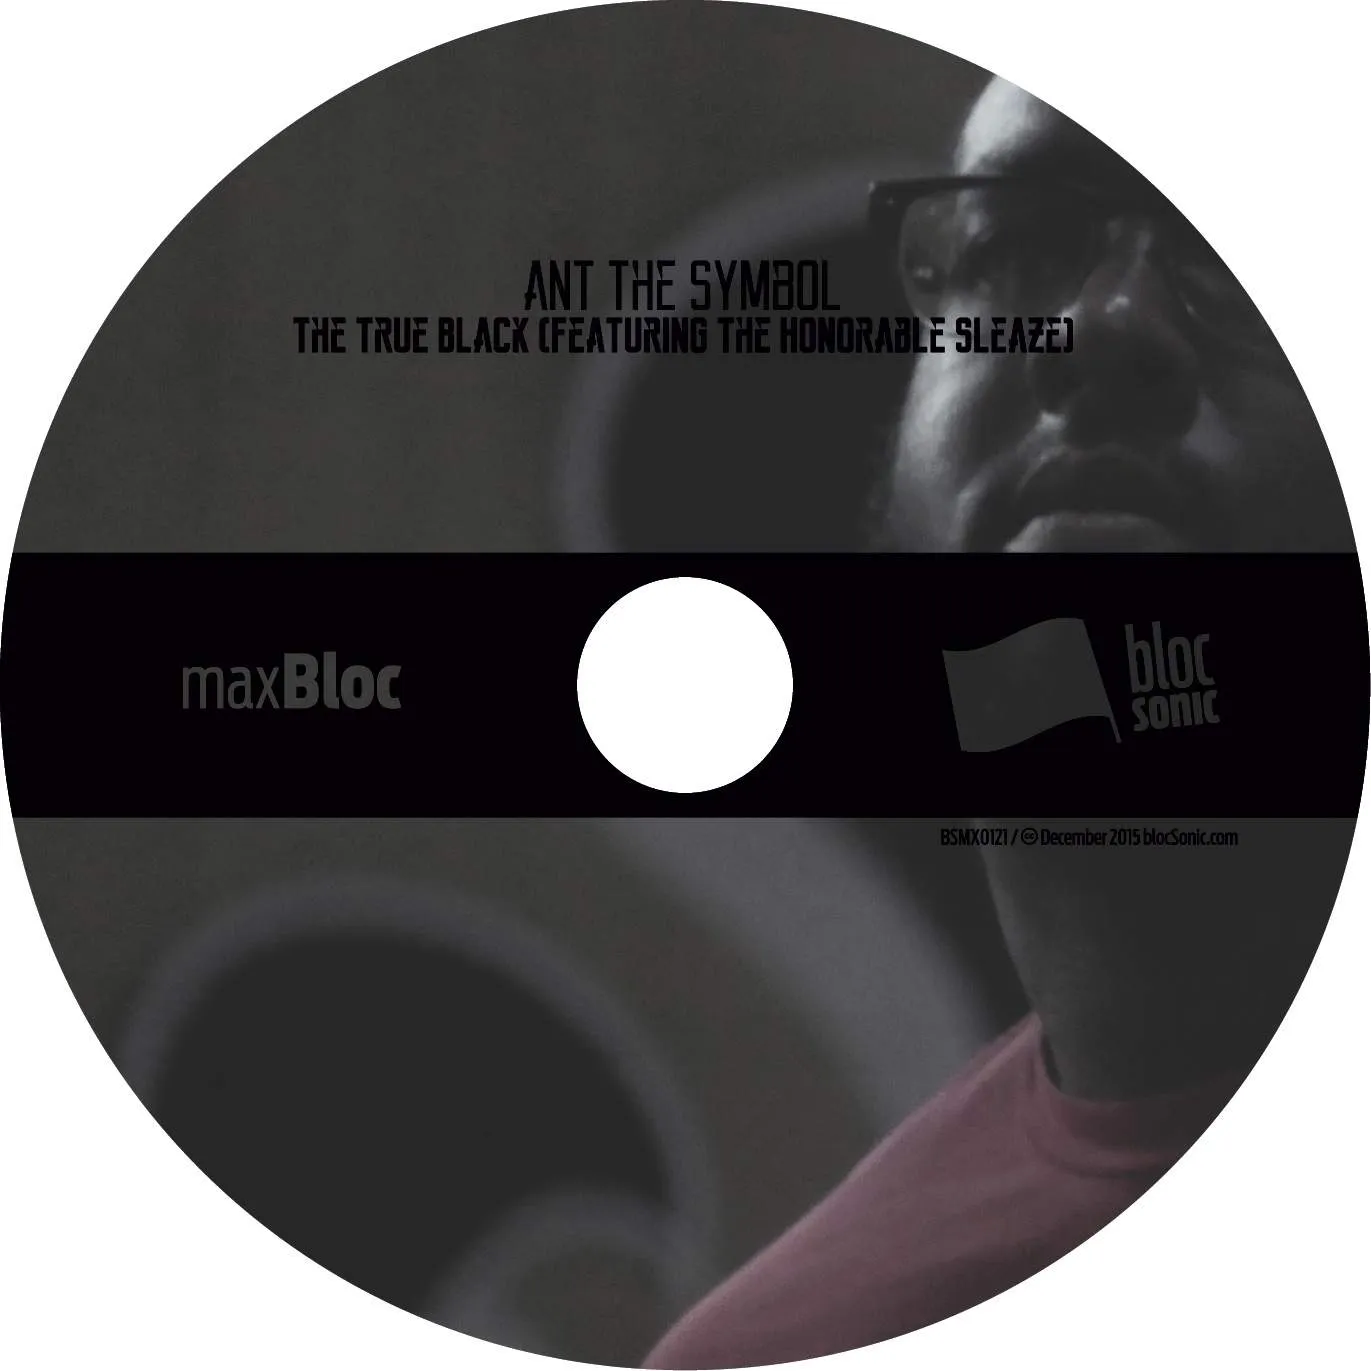 Album disc for “The True Black (Featuring The Honorable Sleaze)” by Ant The Symbol